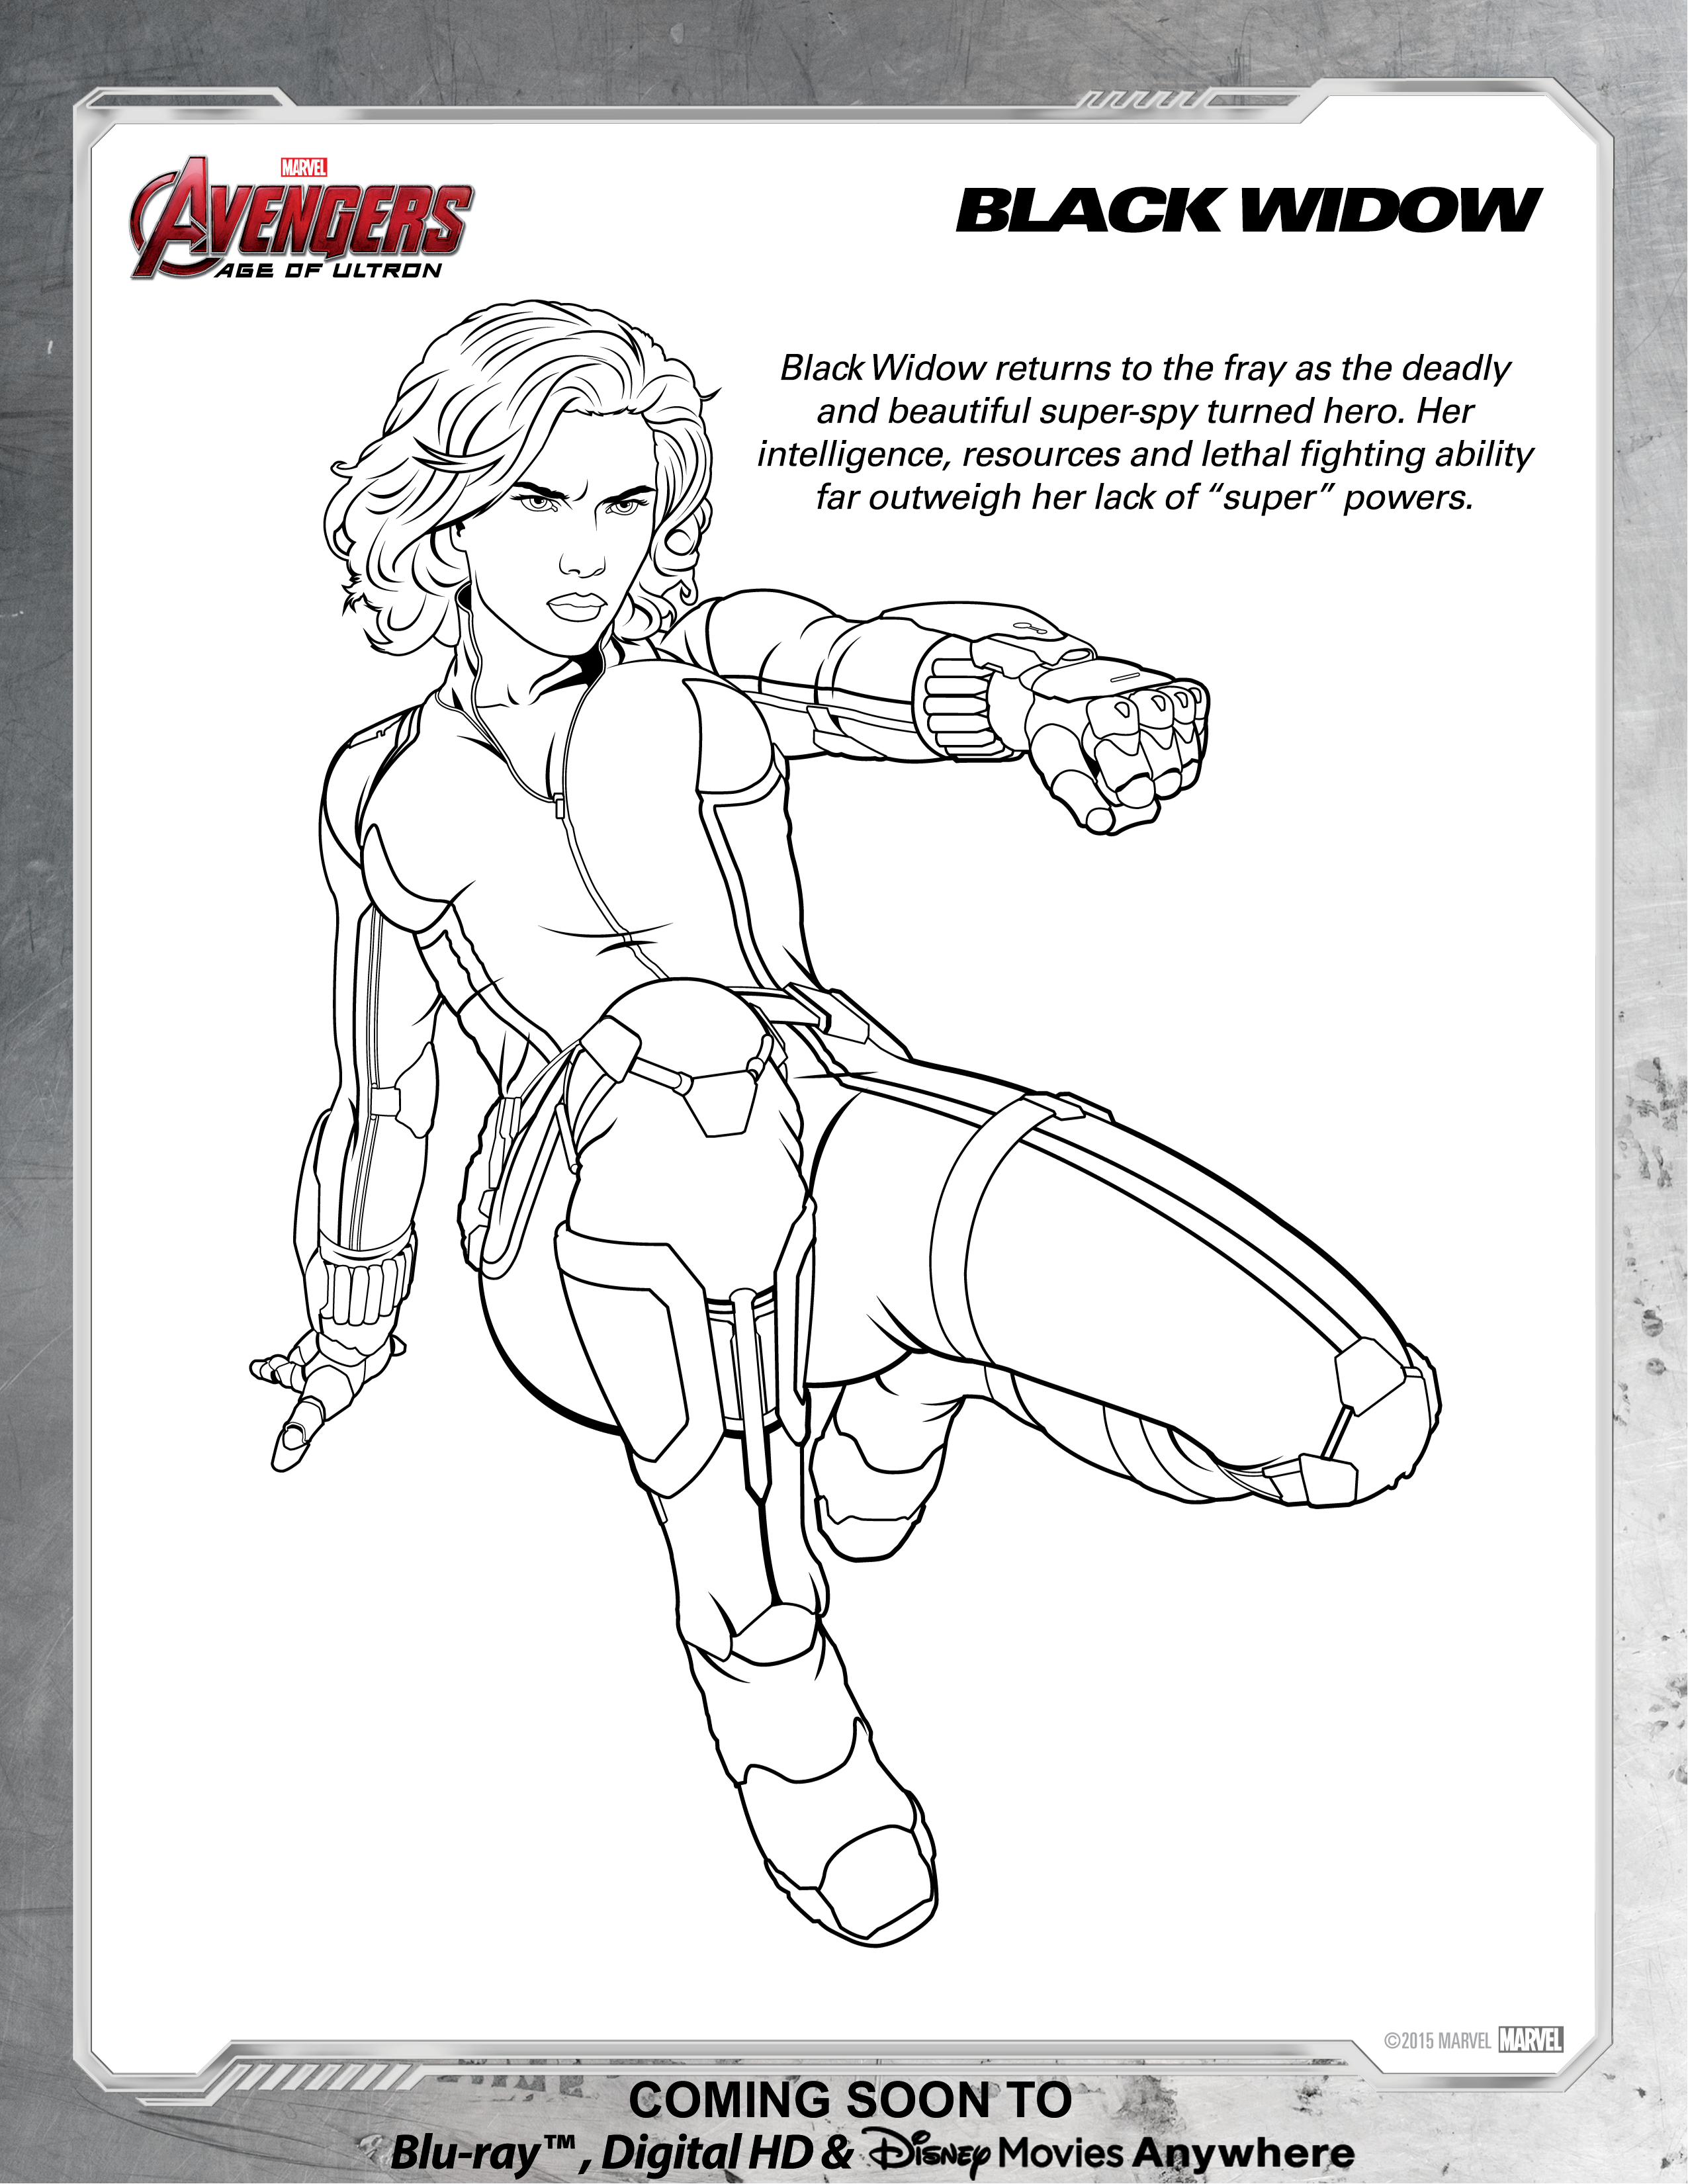 Black Widow Avengers Coloring Pages Avengers Black Widow Coloring Page Disney Movies